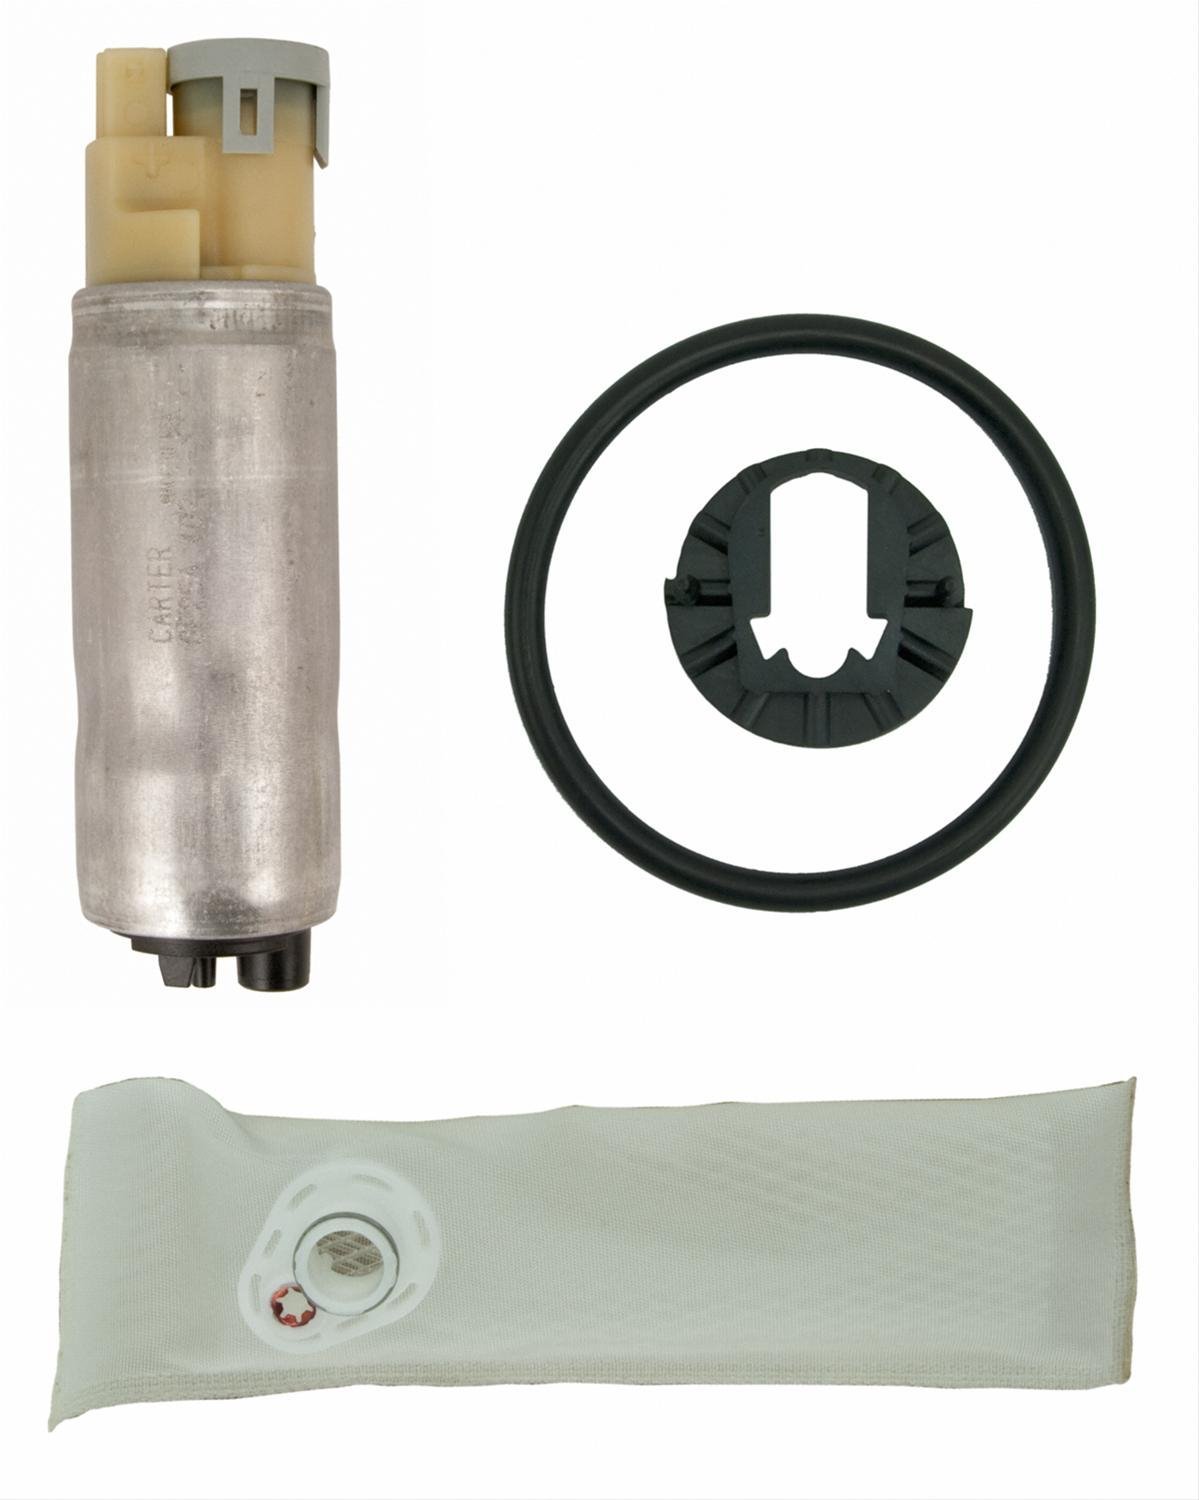 EFI In-Tank Electric Fuel Pump And Strainer Set for 1993-1999 GM Vehicles